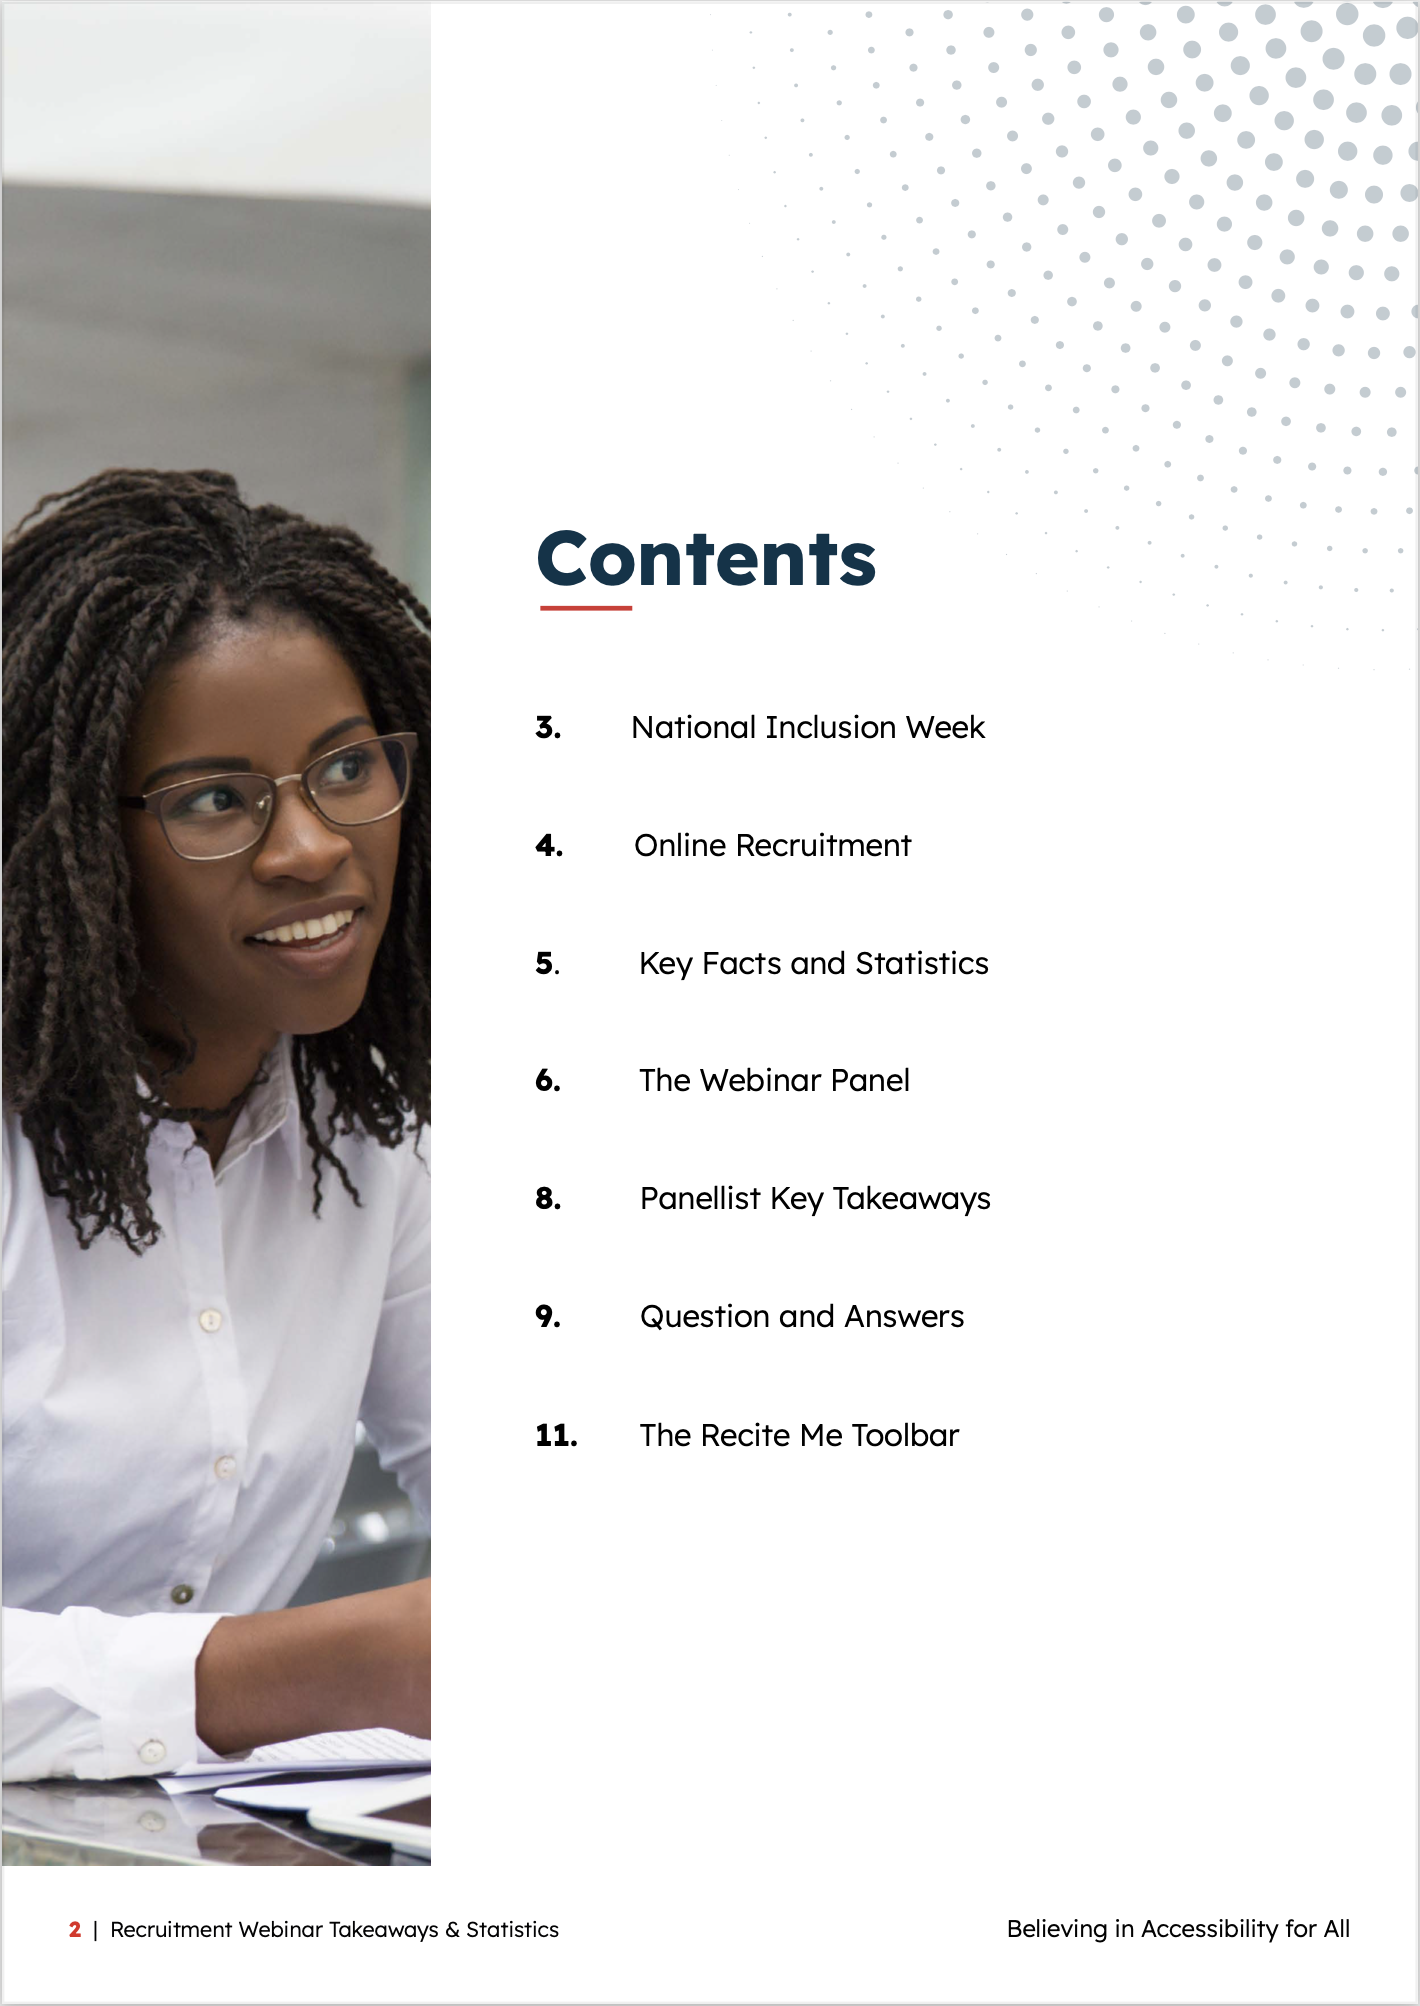 Contents pages of post webinar document